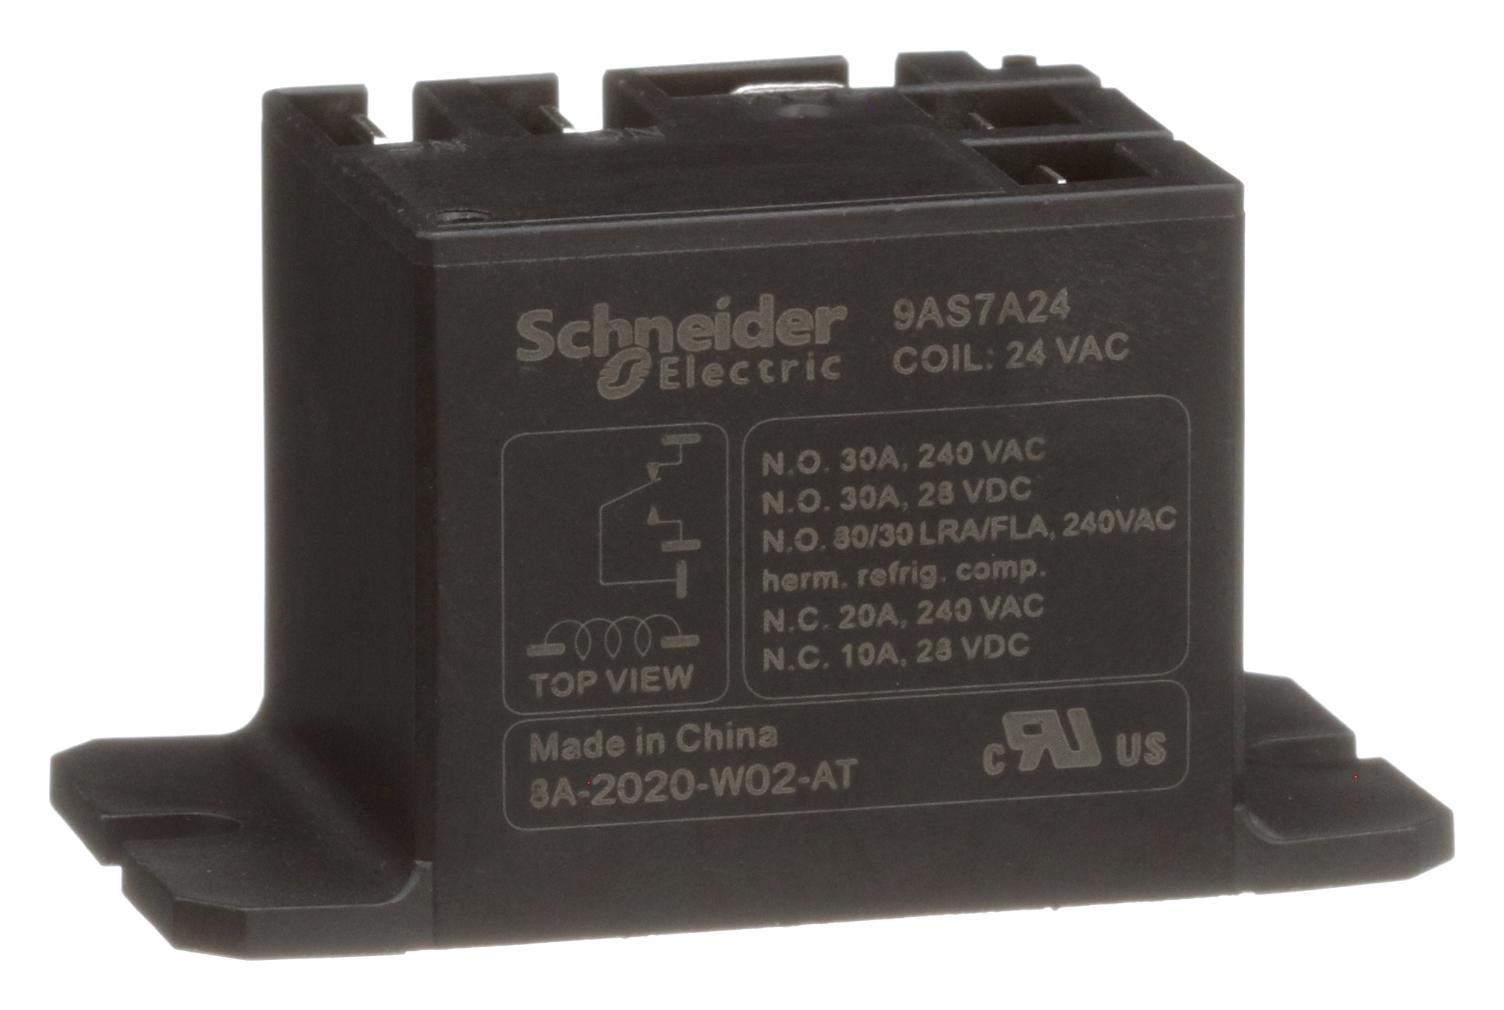 Schneider Electric/legacy Relay 9As7A24 Power Relay, Spdt, 24Vac, 30A, Panel